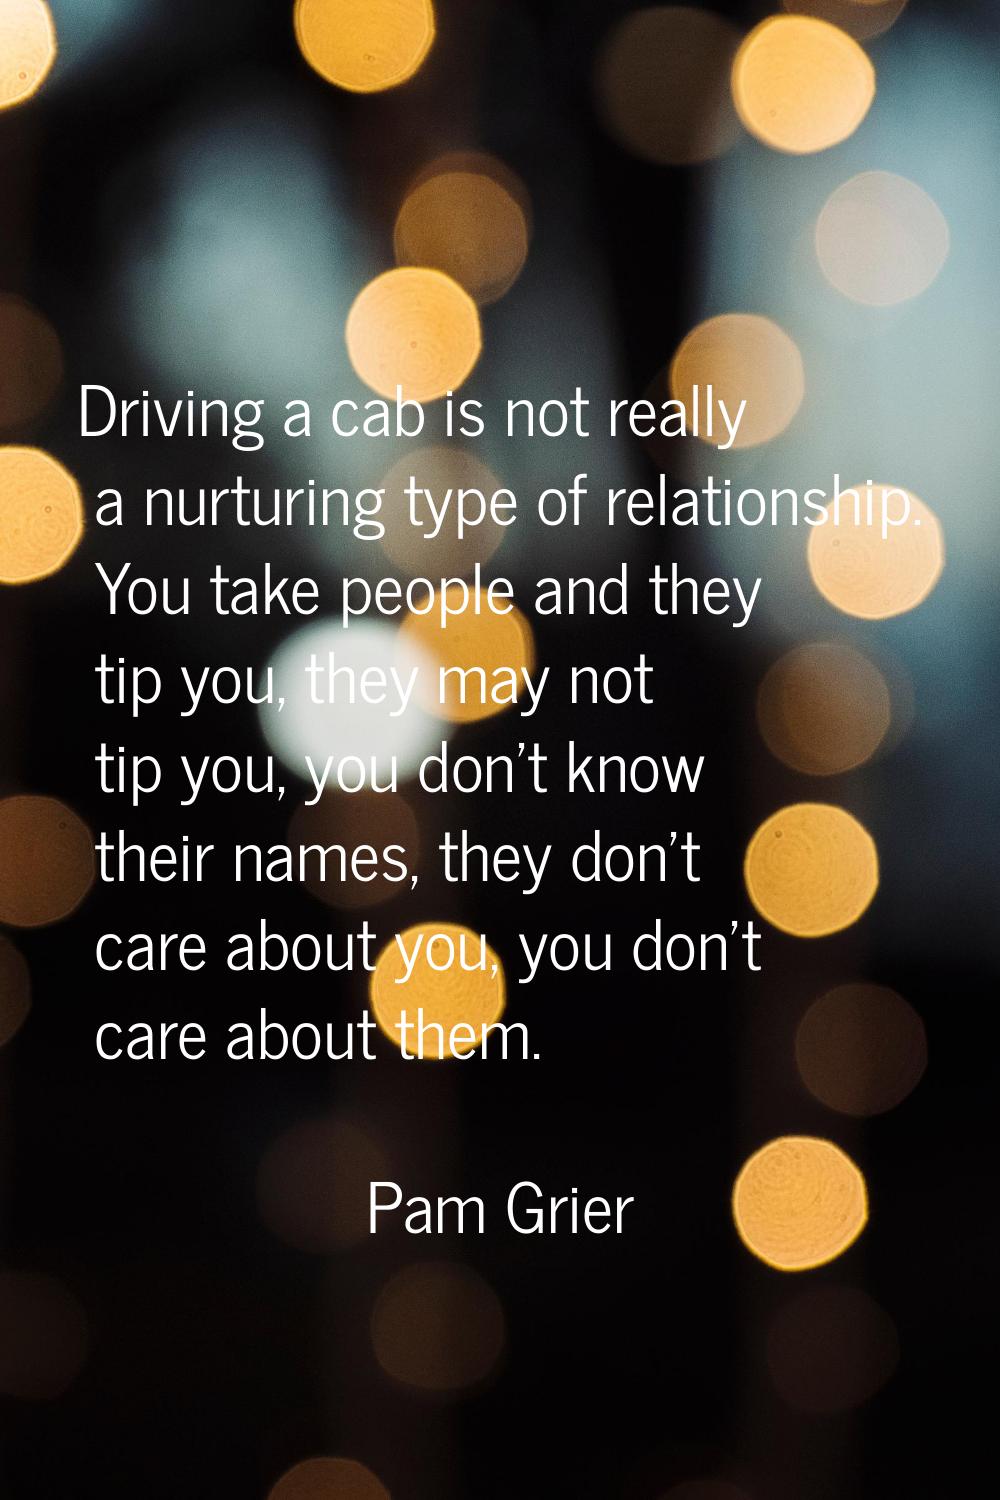 Driving a cab is not really a nurturing type of relationship. You take people and they tip you, the